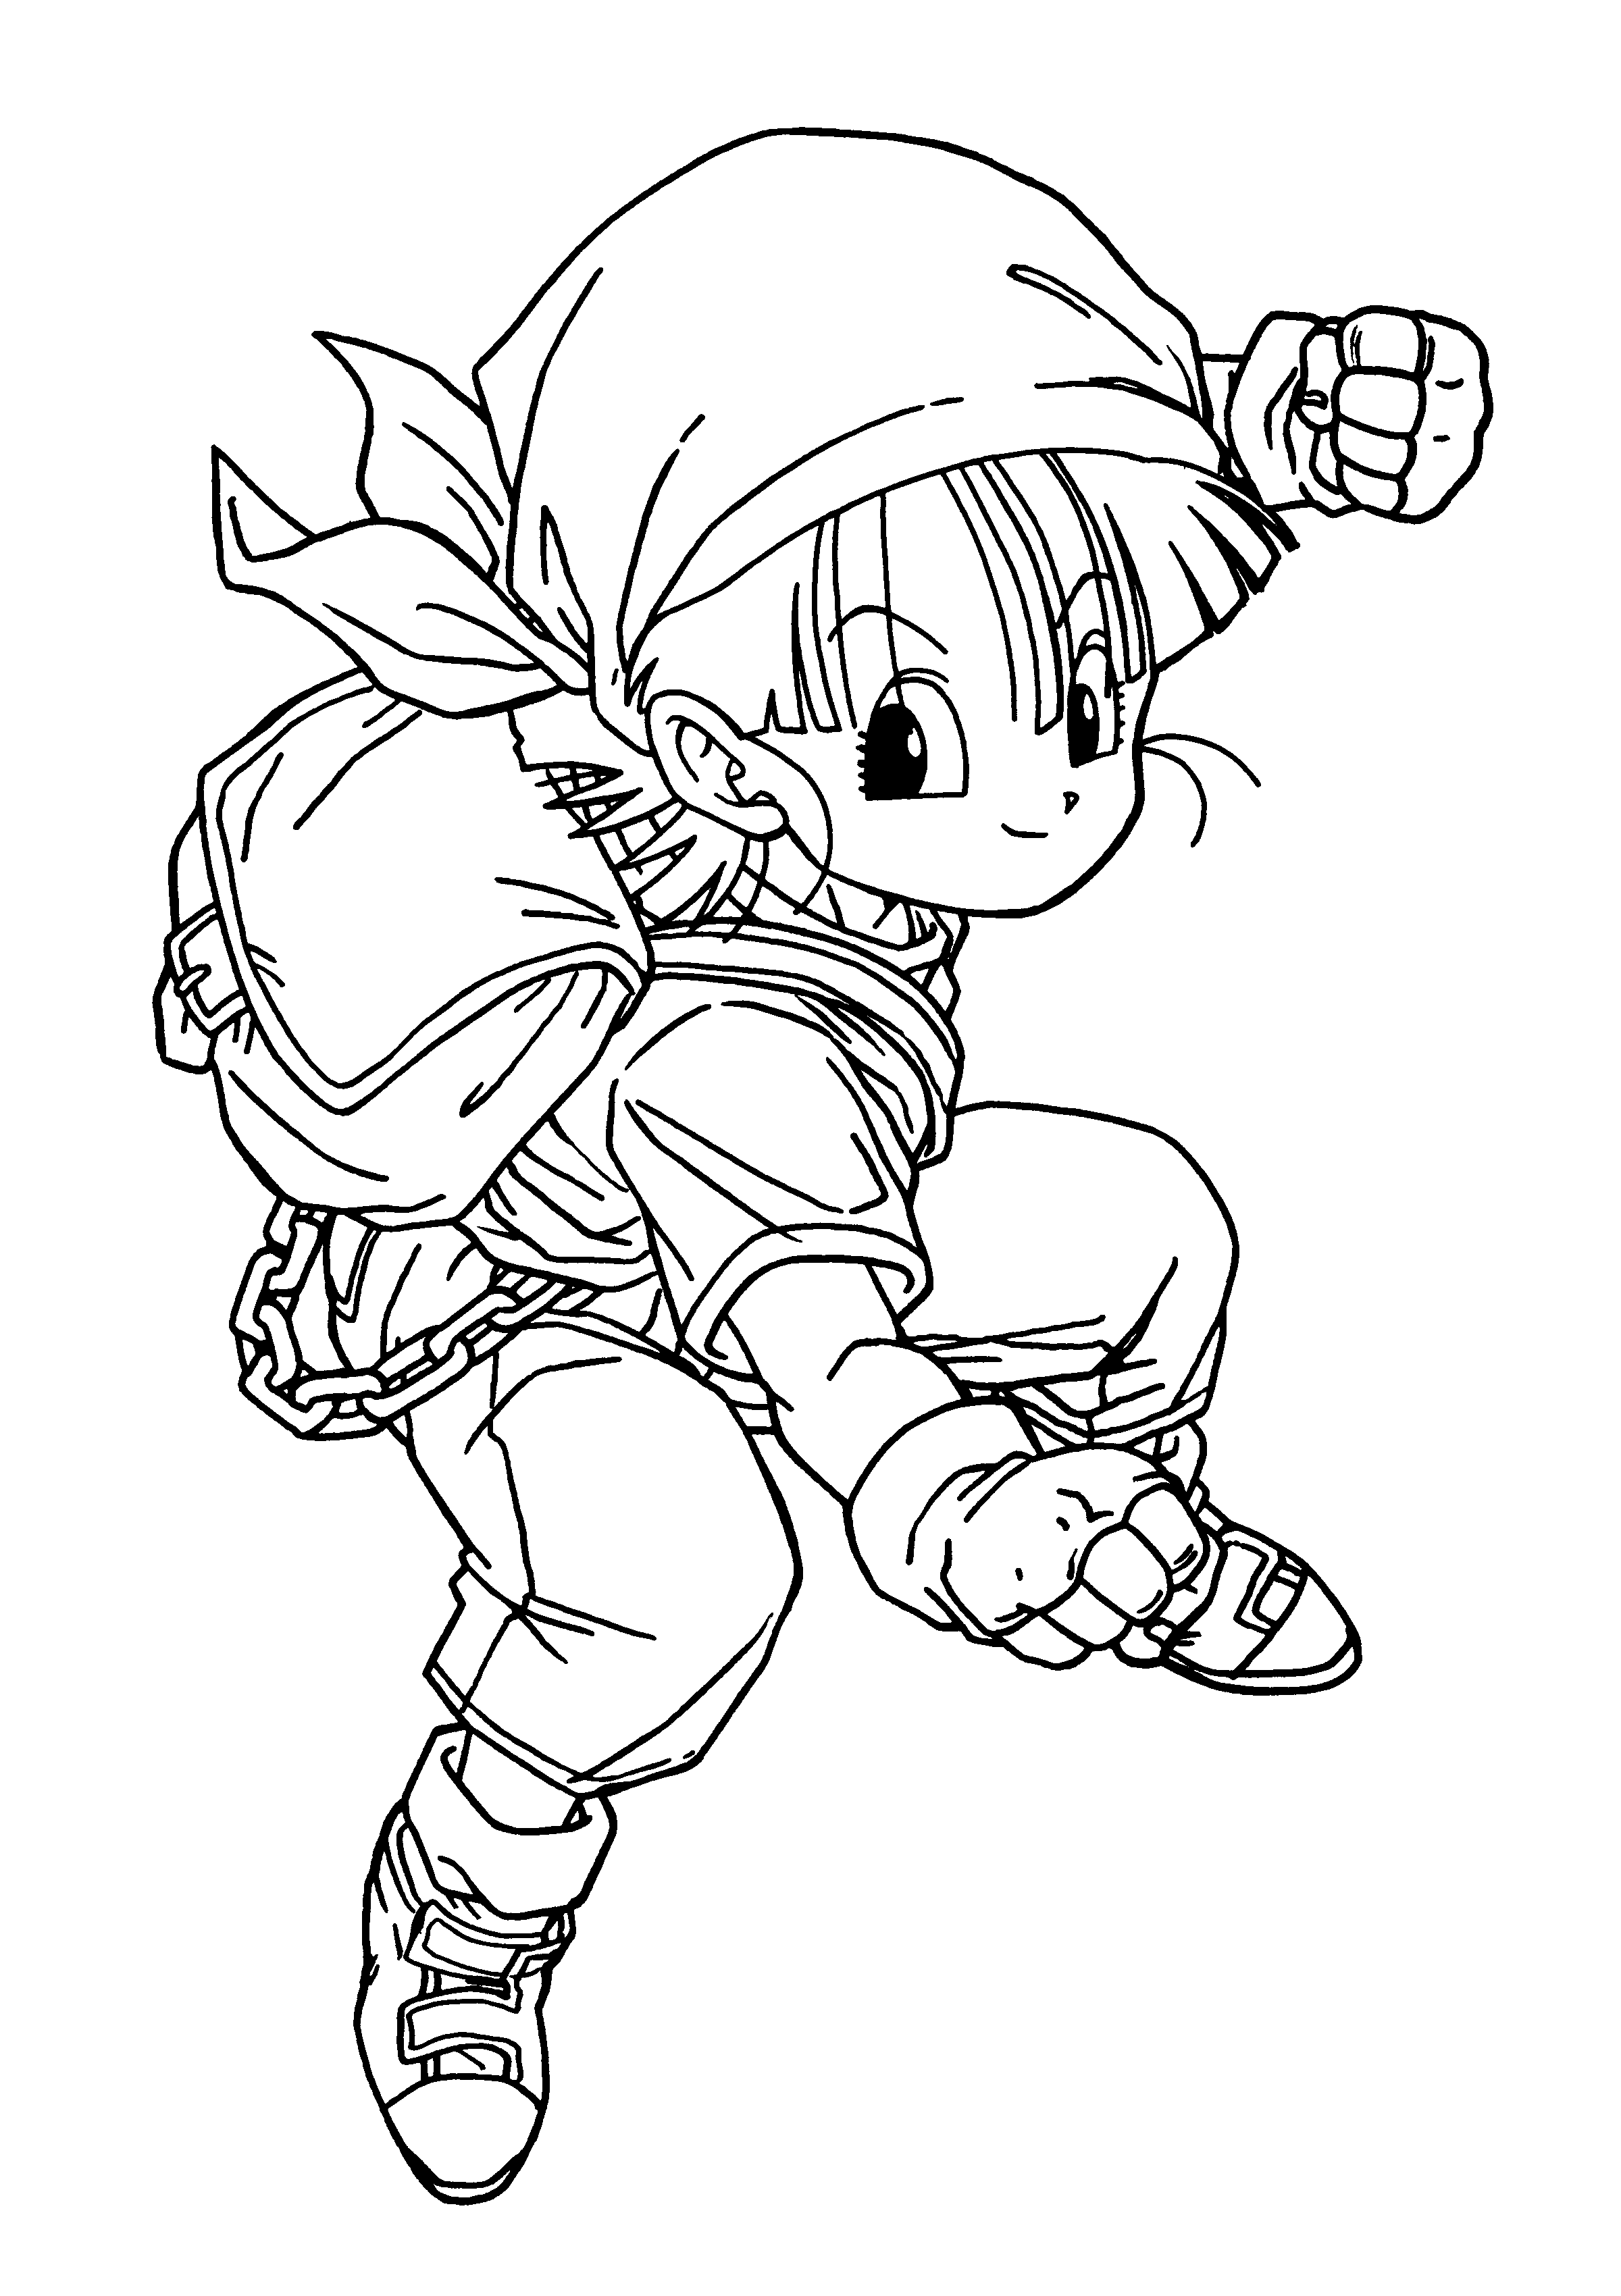 Dragon Ball Z Gt Colouring Pages - High Quality Coloring Pages